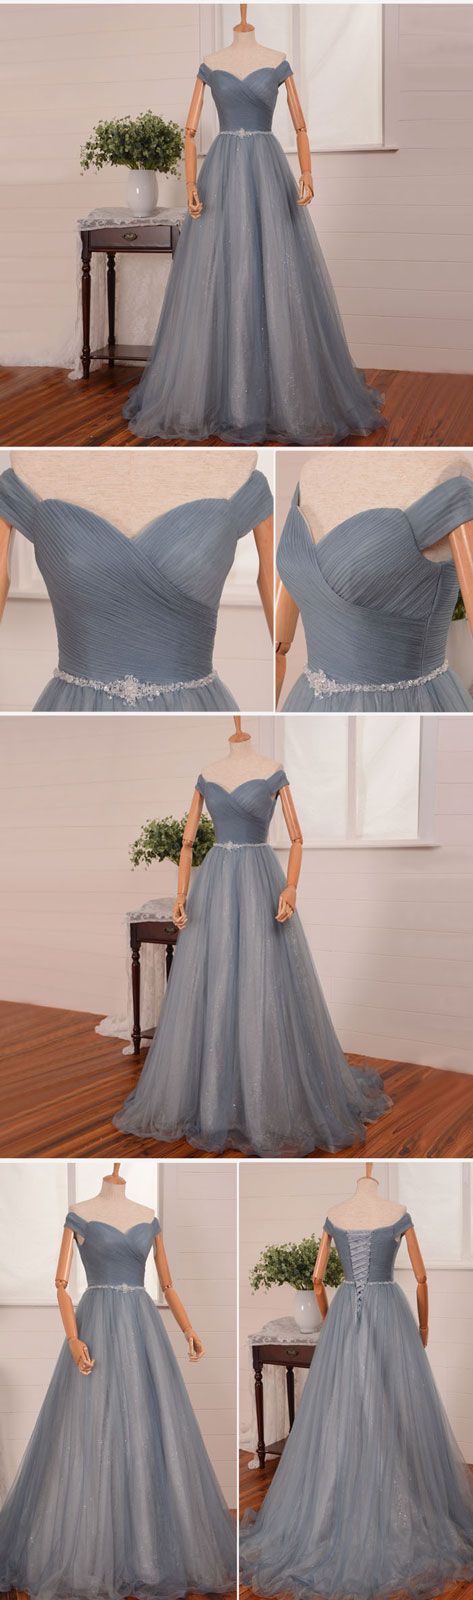 Simple Gray Tulle Long Tulle Prom Dress, Gray Evening Dress, Gray Bridesmaid Dress,pd14103